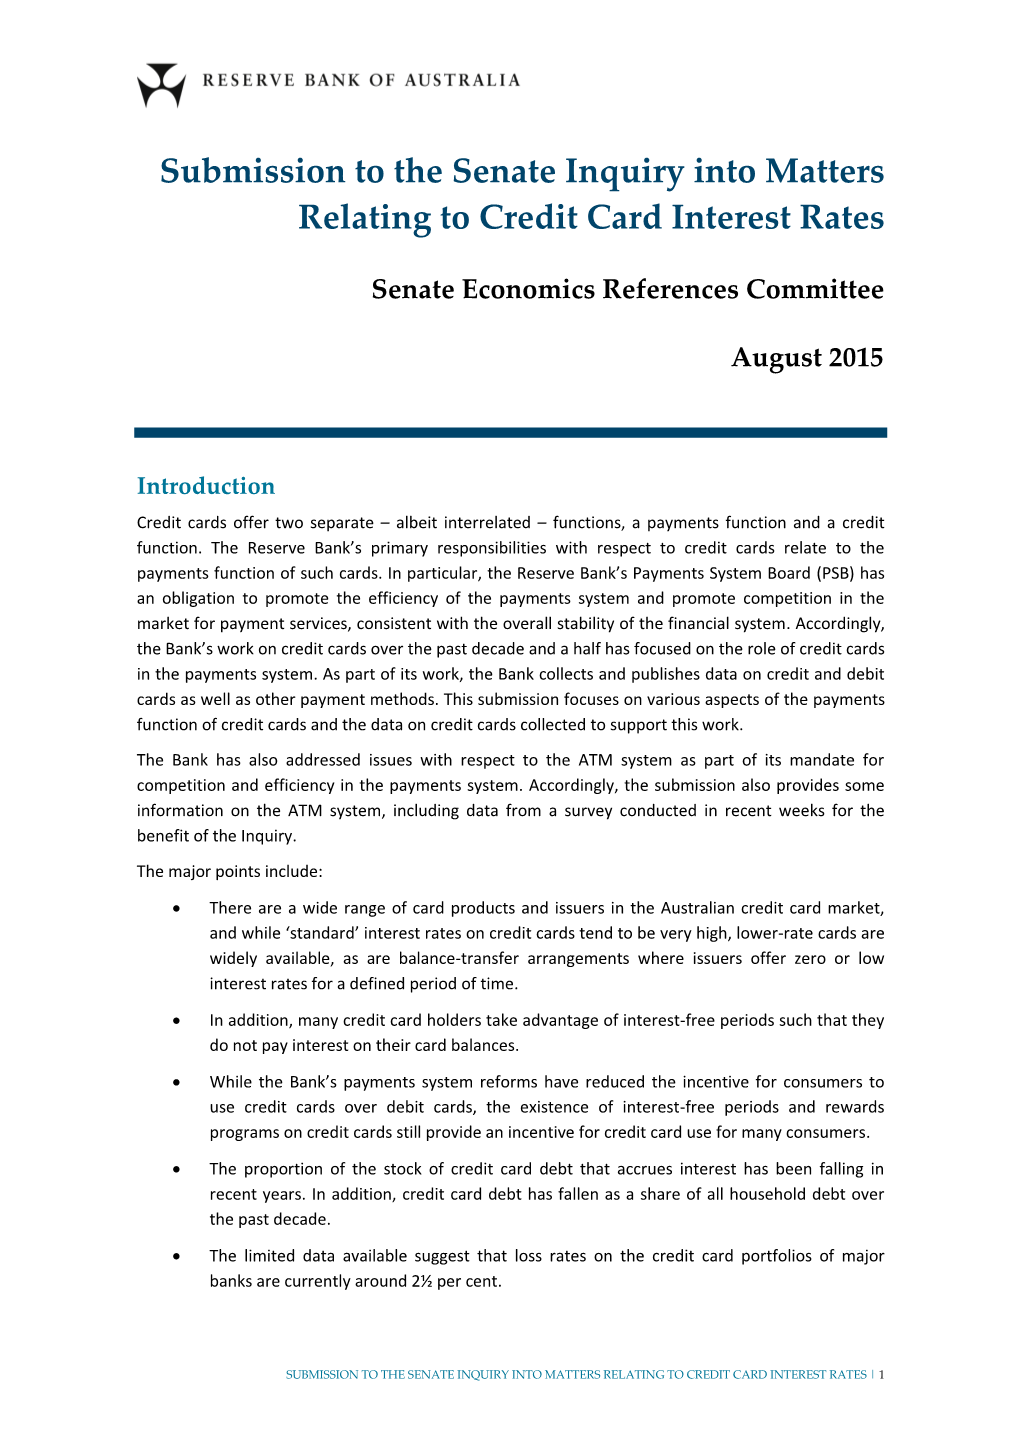 Submission to the Senate Inquiry Into Matters Relating to Credit Card Interest Rates